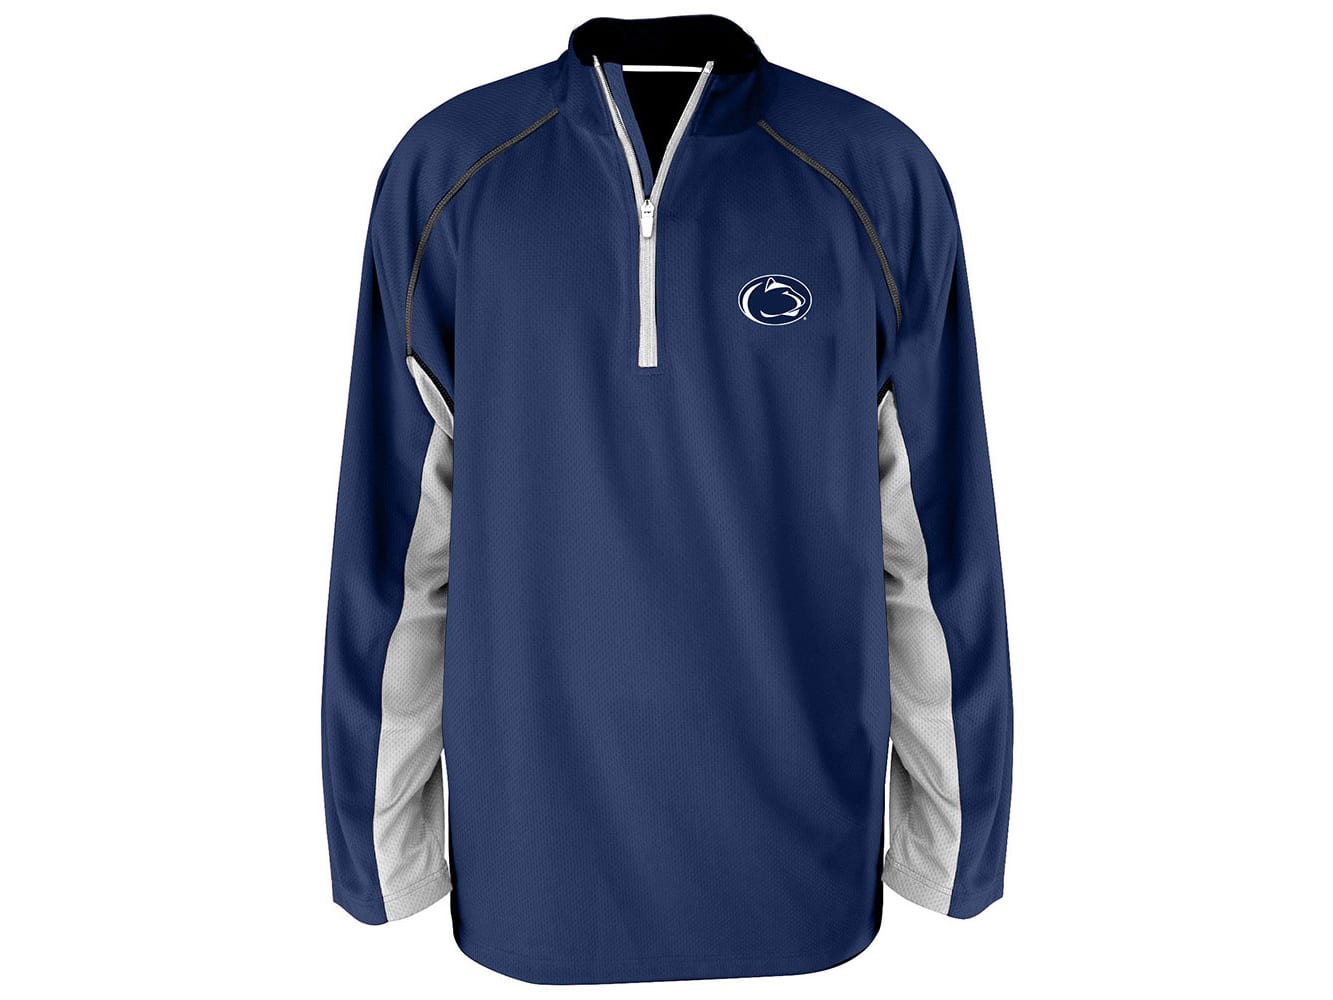 Rally House  Penn State Nittany Lions Sweatshirts Sweaters Quarter Zips